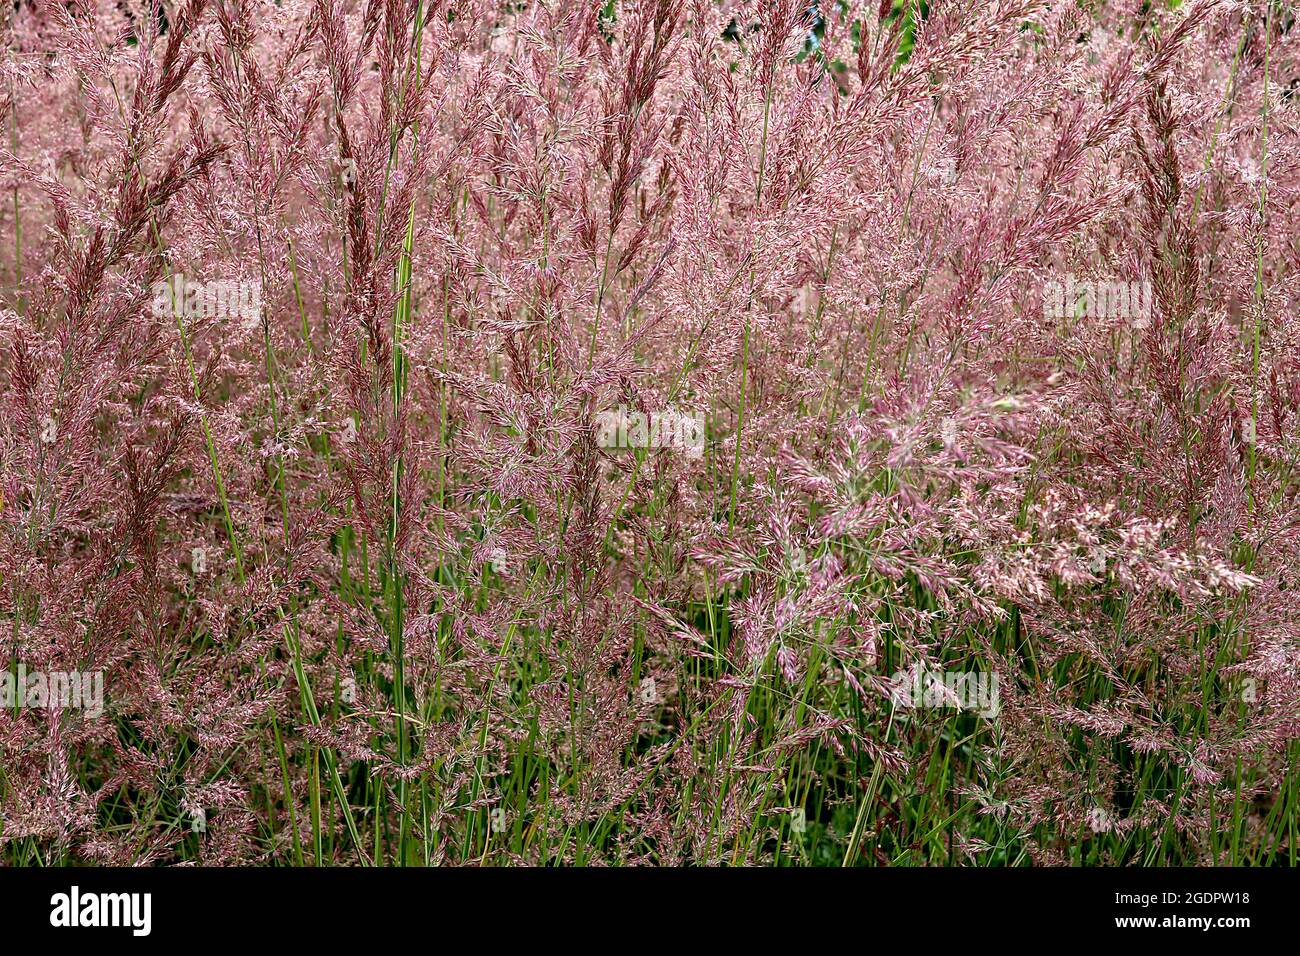 Calamagrostis x acutfilora ‘Karl Foerster’ feather reed grass Karl Foerster – feathery plumes of purple flower panicles on tall fresh green stems, Stock Photo